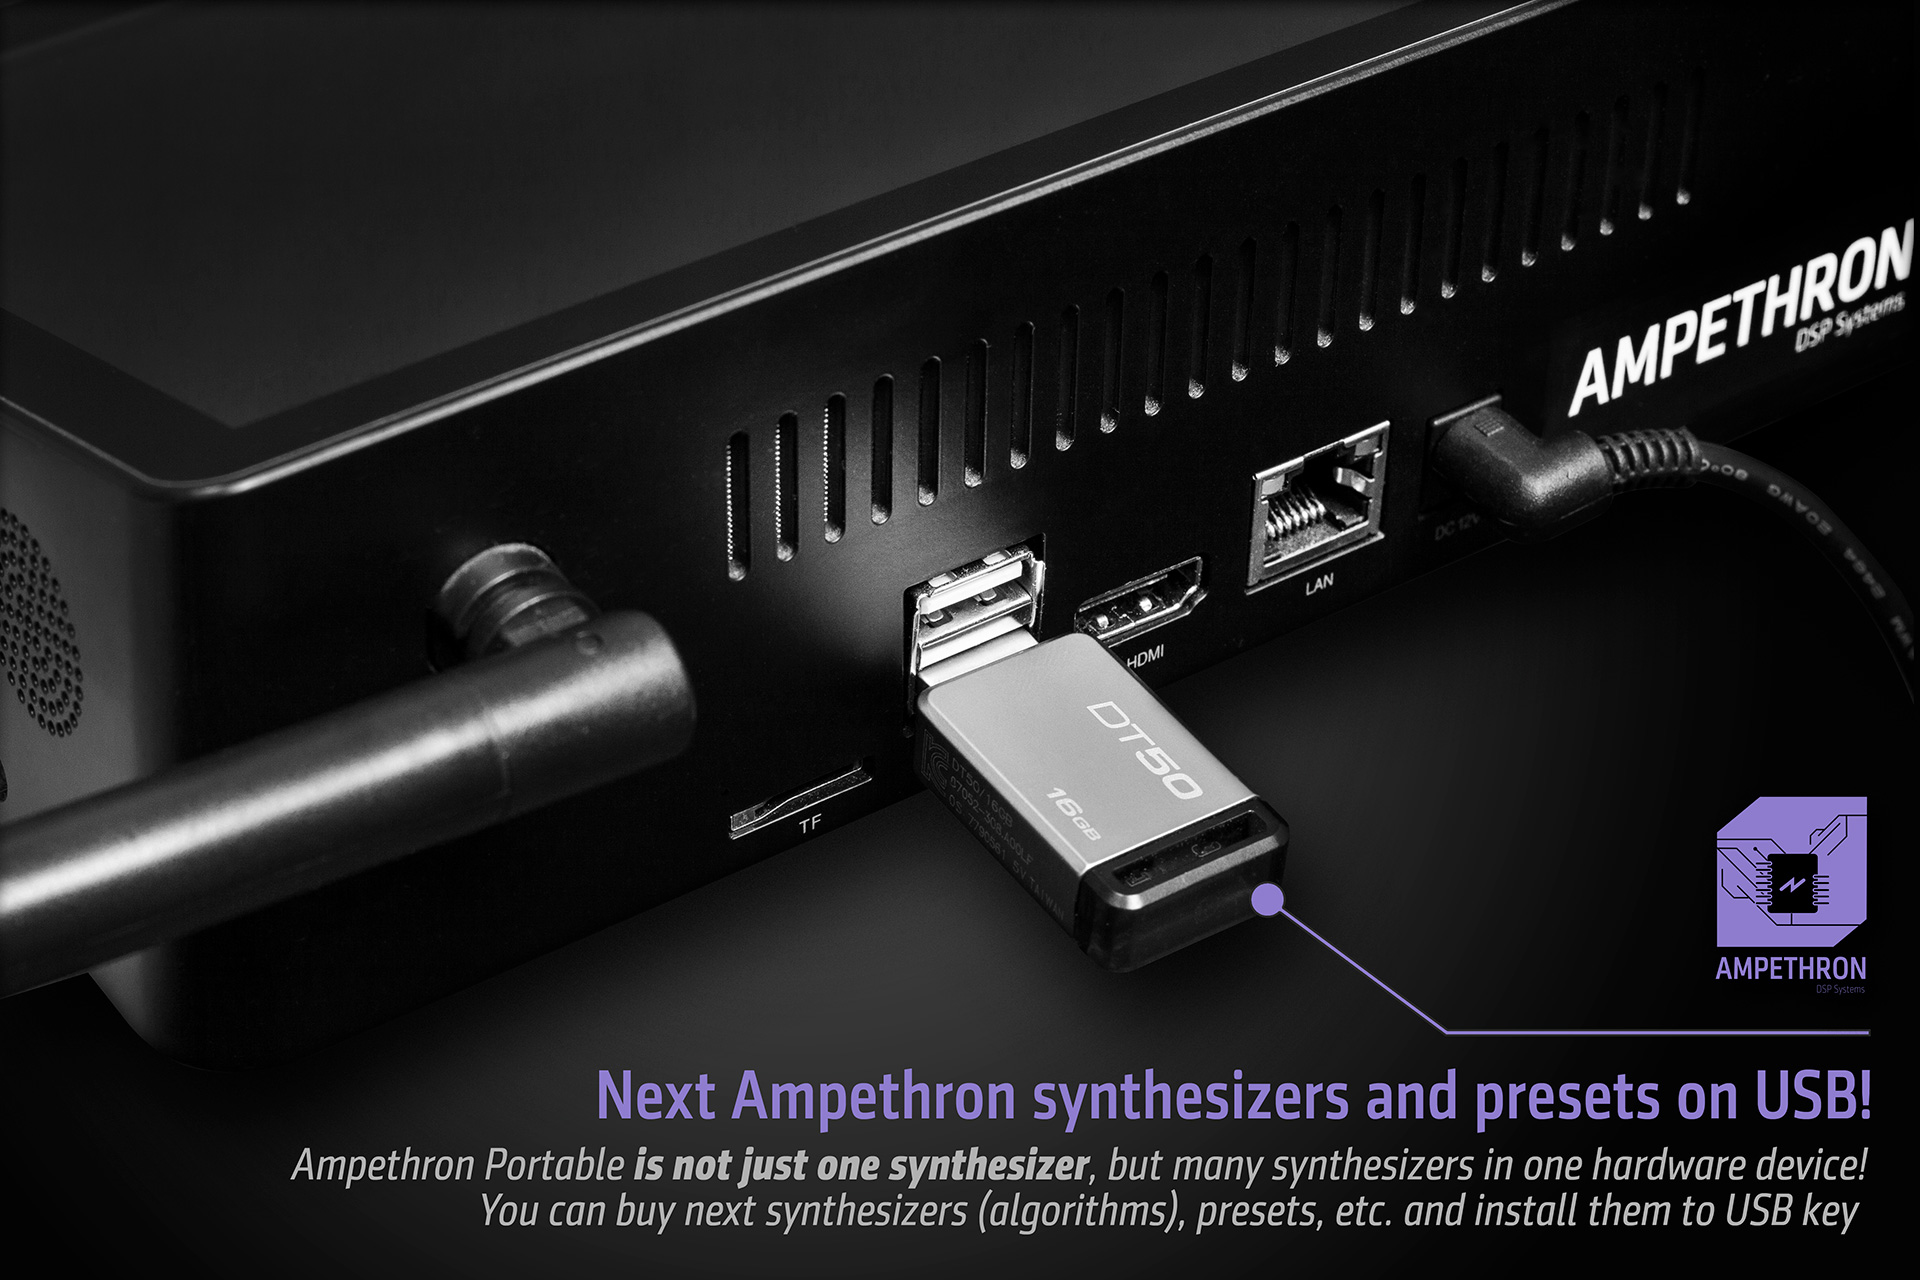 Next Ampethron synthesizers and presets on USB